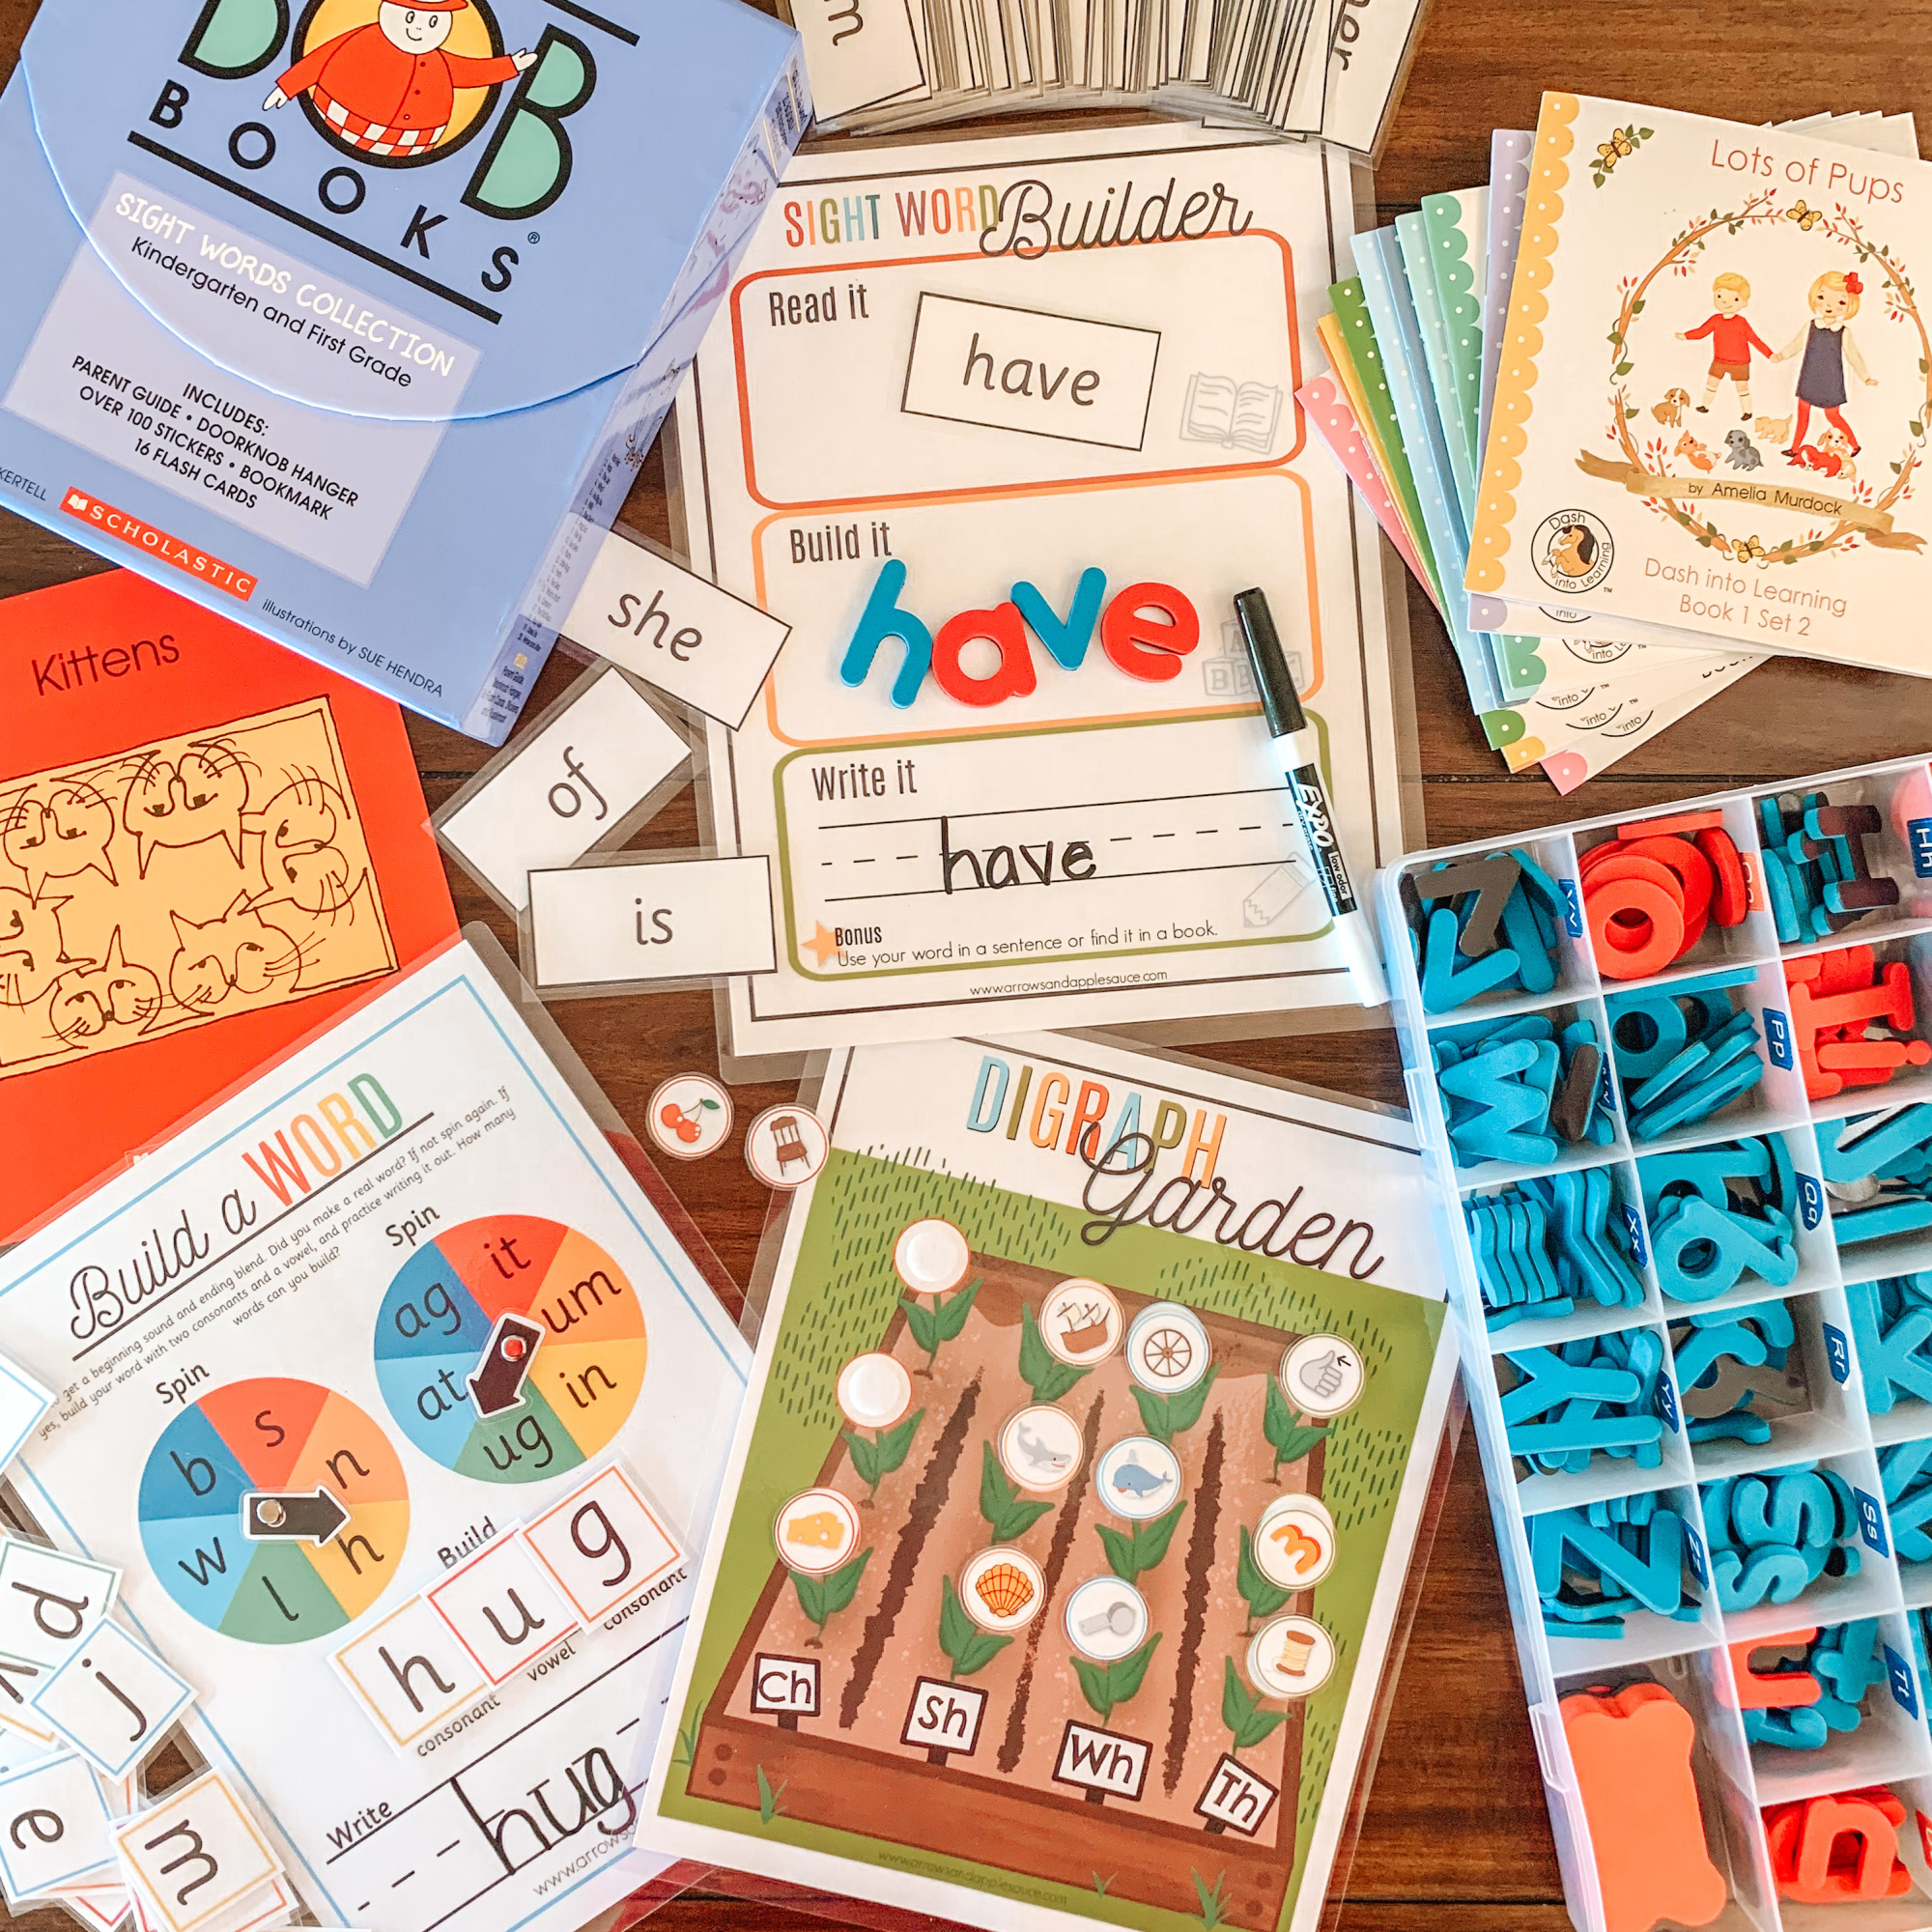 We have loved the process of learning to read thanks to these fun and easy to use resources, games, and tips. It's so fun to watch little ones learn! #learningtoread #homeschoolresources #homeschoolkindergarten #teachingkidstoread #homeschoolprintables #readinggames